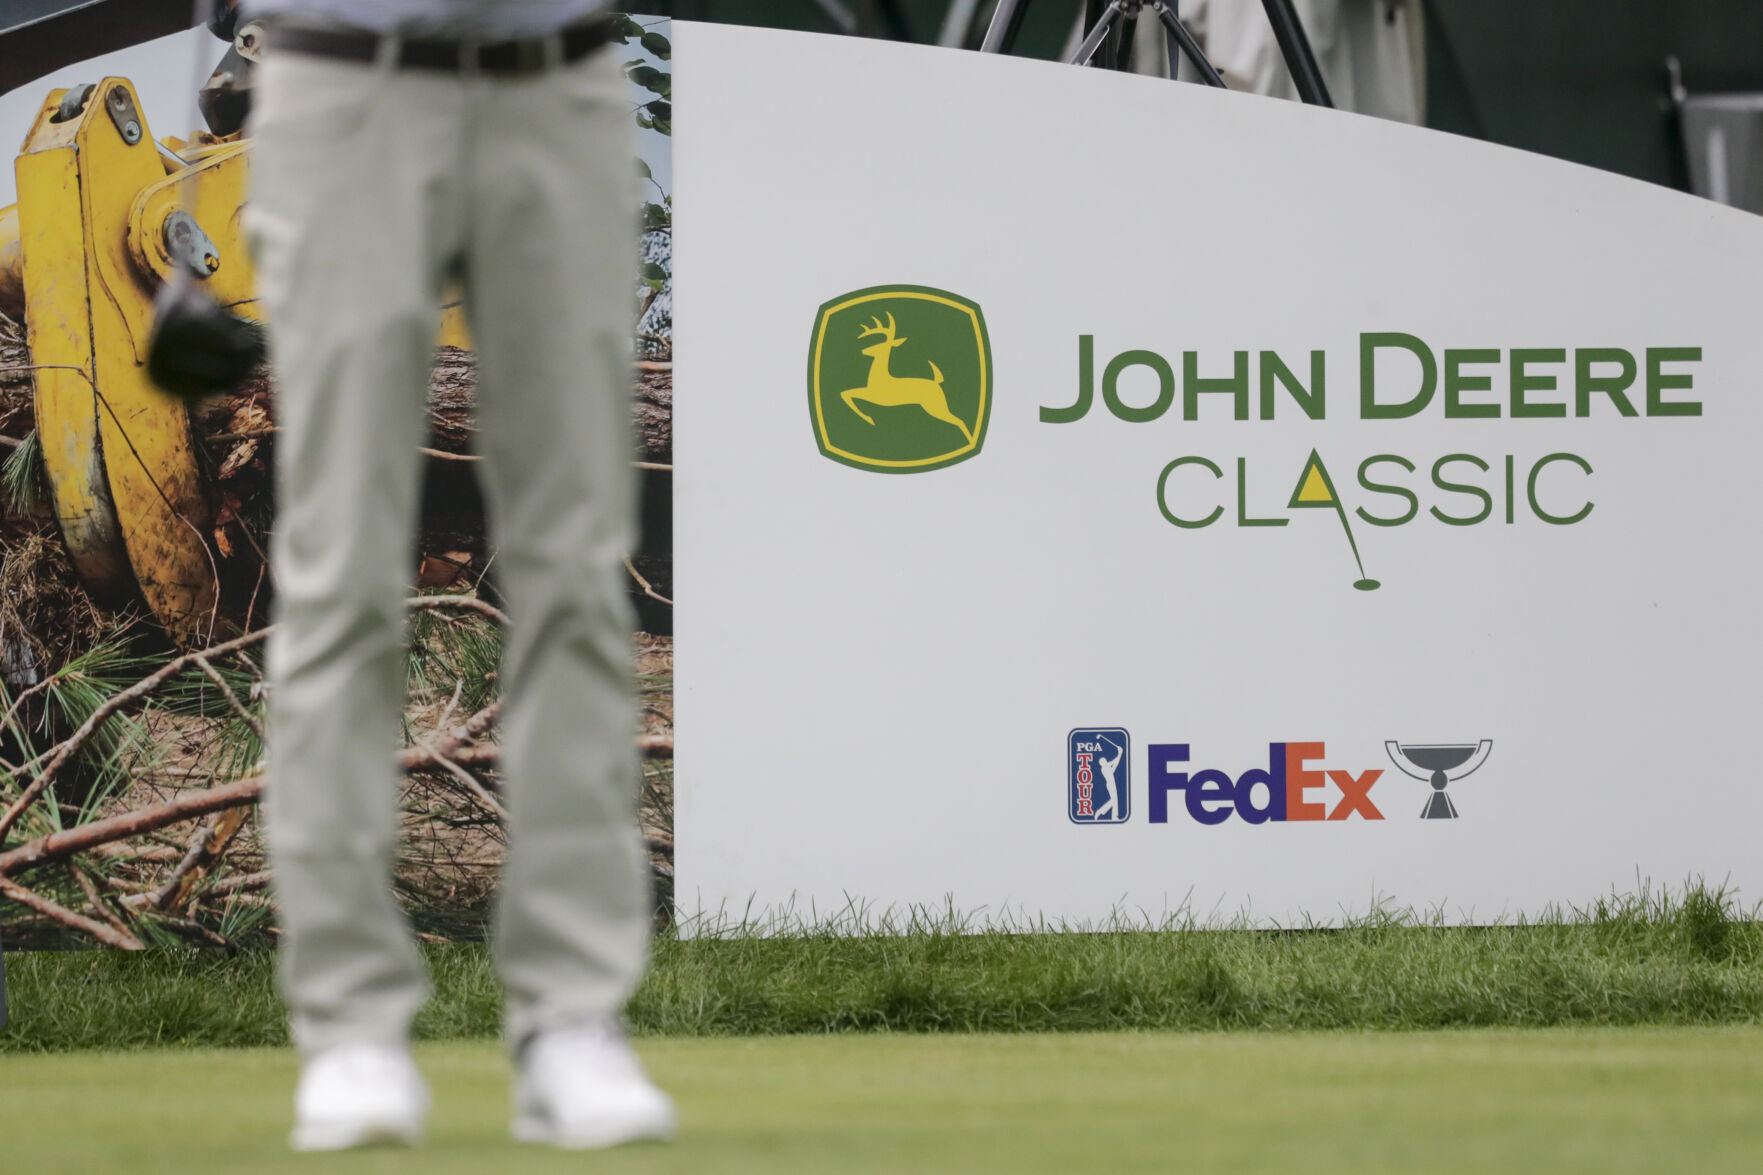 GOLF PGA Tour introduces drastic scheduling changes; affect on JDC unknown